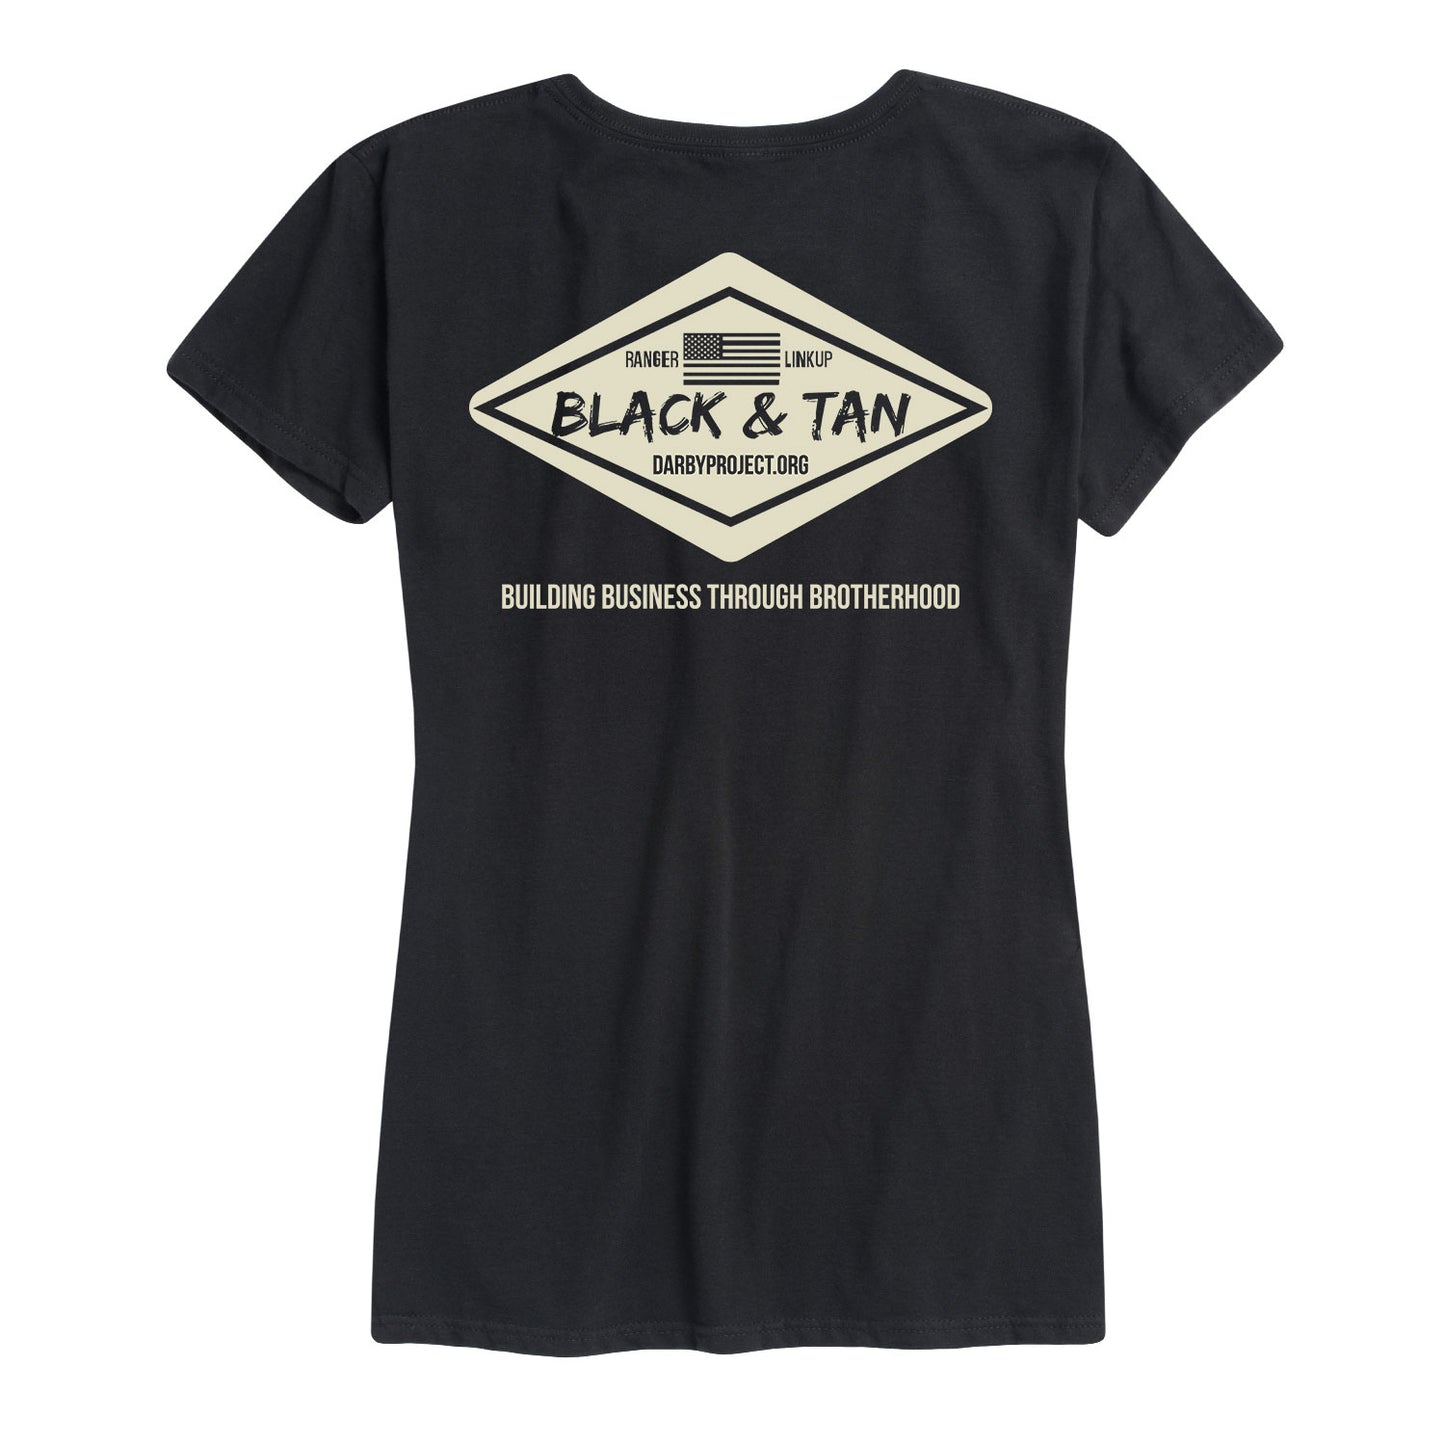 Women's Darby Project Black and Tan Tee